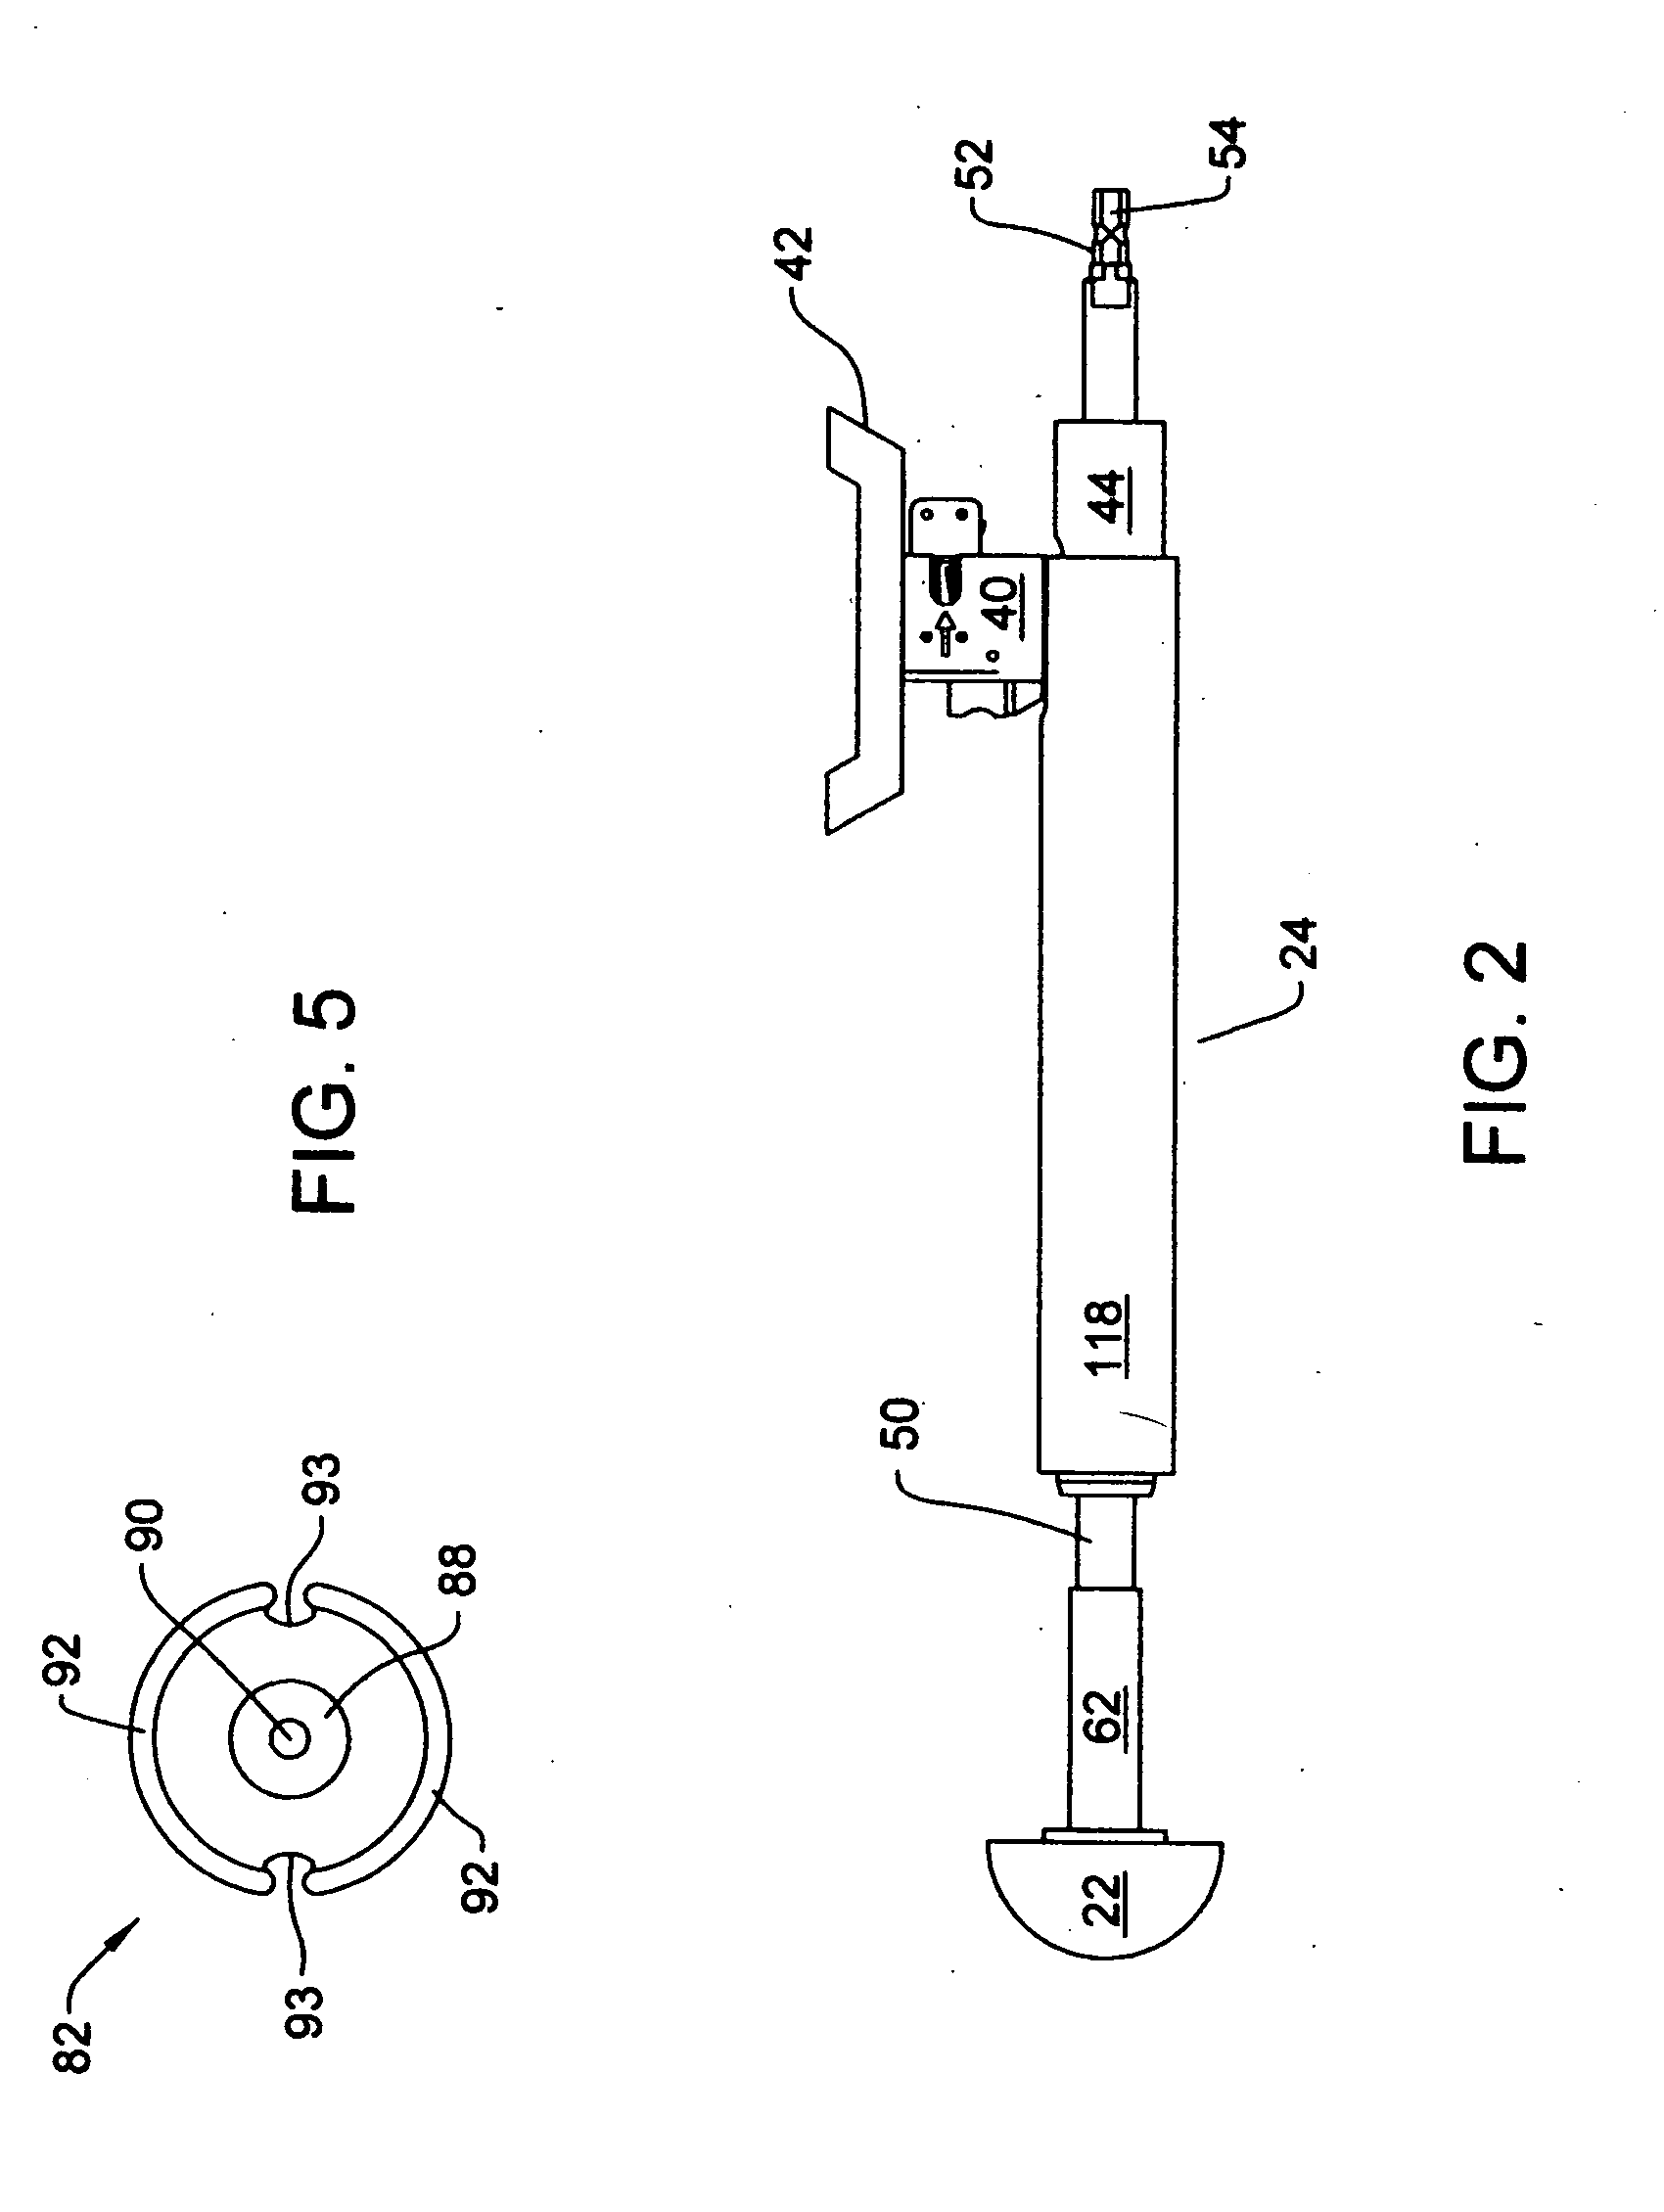 Wireless system for providing instrument and implant data to a surgical navigation unit